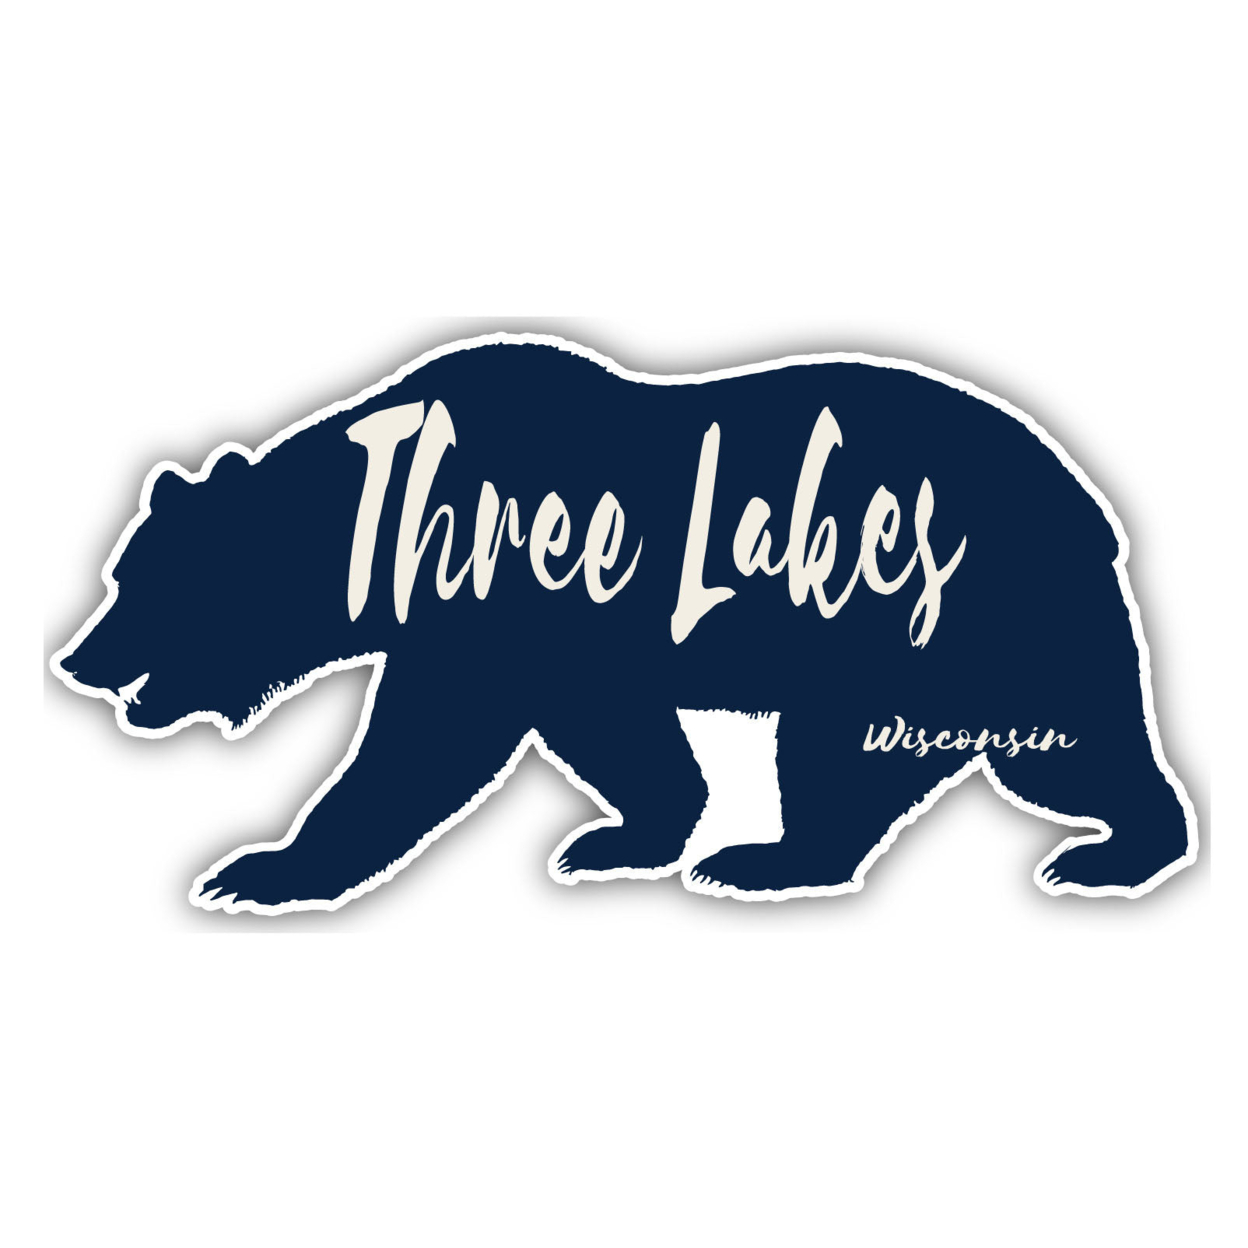 Three Lakes Wisconsin Souvenir Decorative Stickers (Choose Theme And Size) - Single Unit, 2-Inch, Great Outdoors